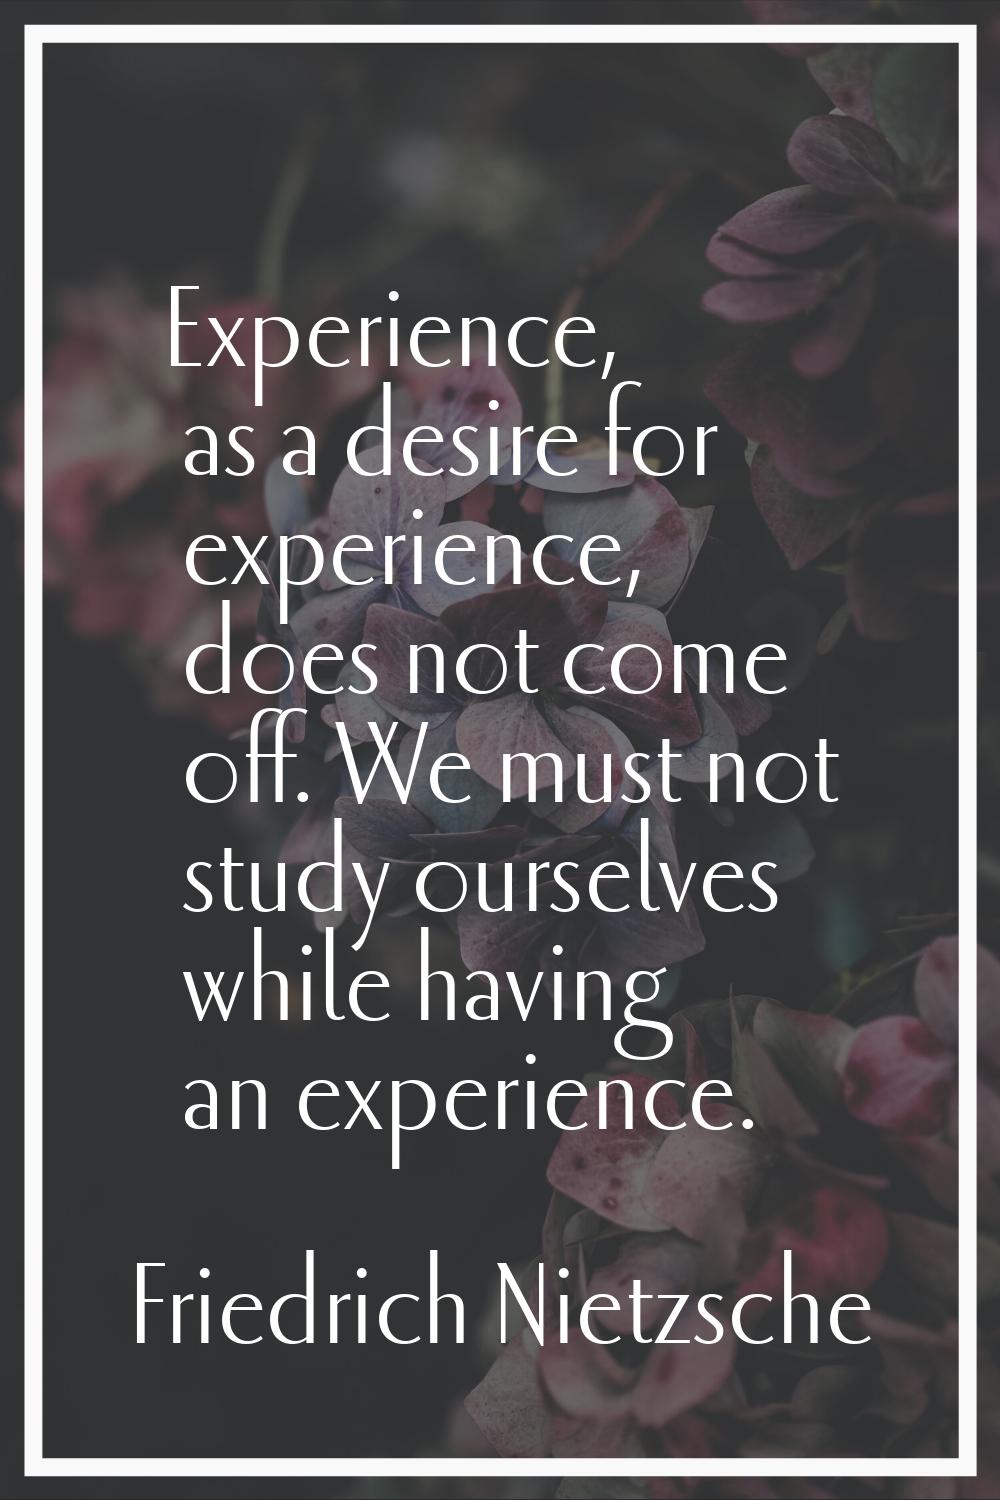 Experience, as a desire for experience, does not come off. We must not study ourselves while having